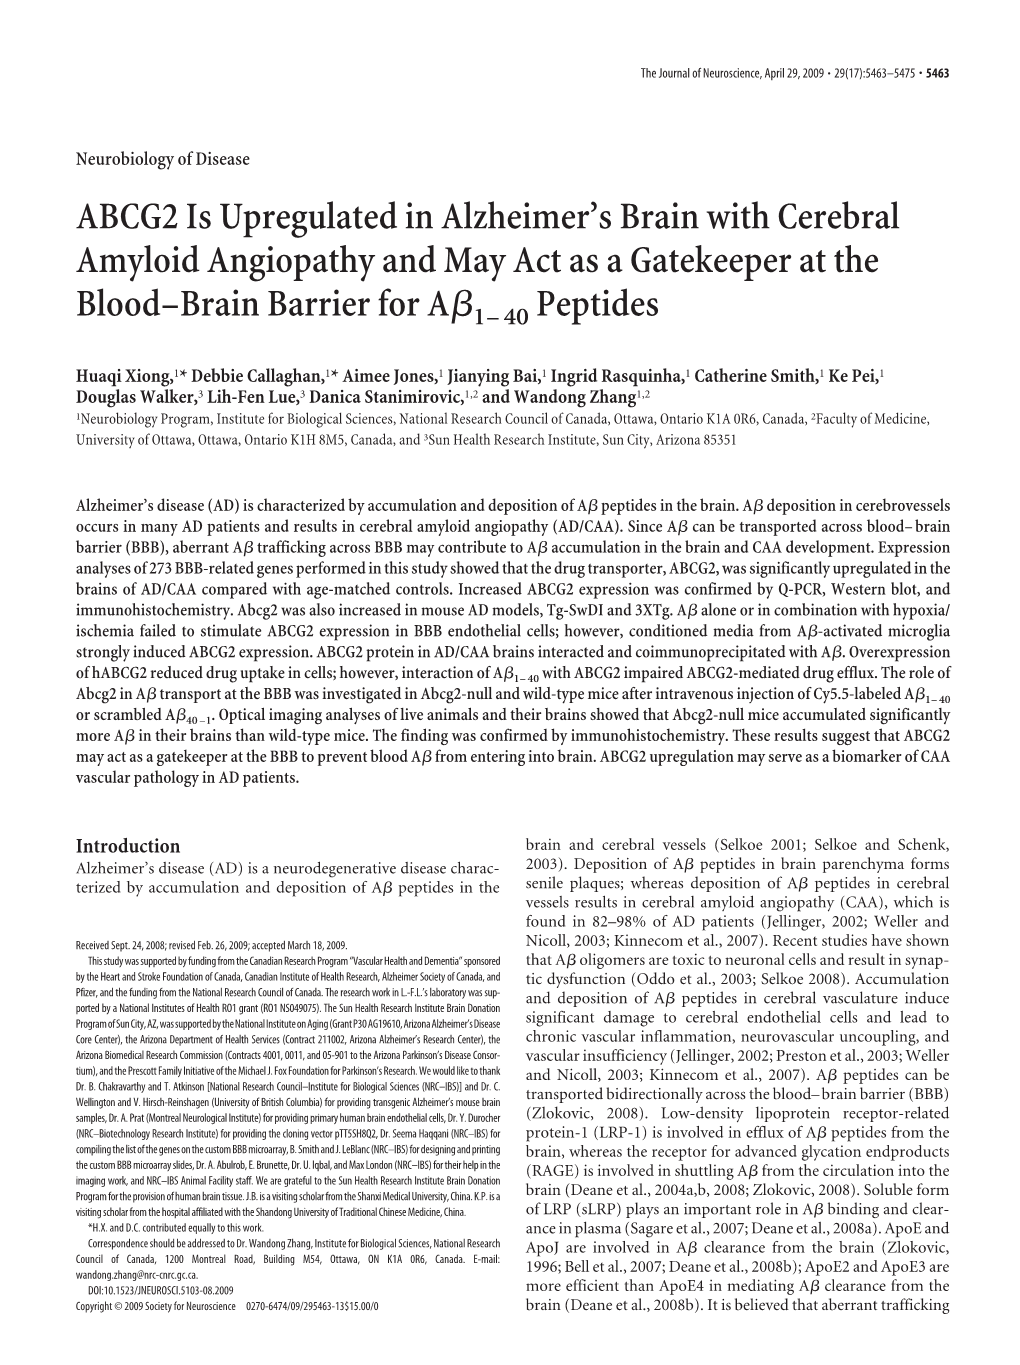 ABCG2 Is Upregulated in Alzheimer's Brain with Cerebral Amyloid